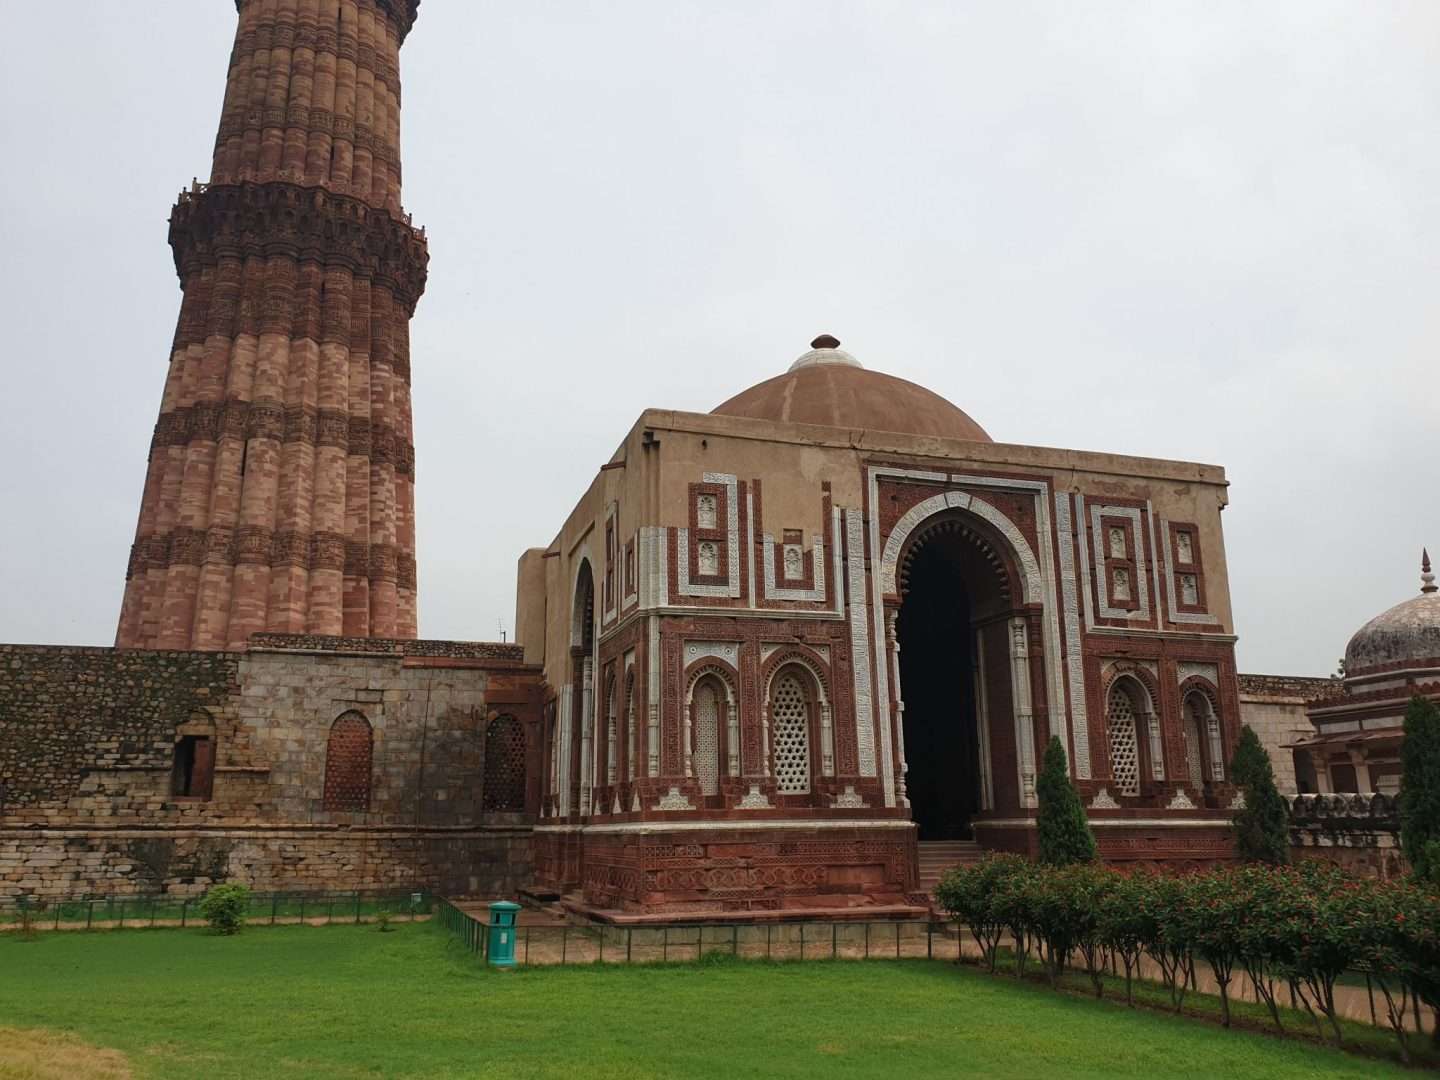 Top sights to see in Delhi, India